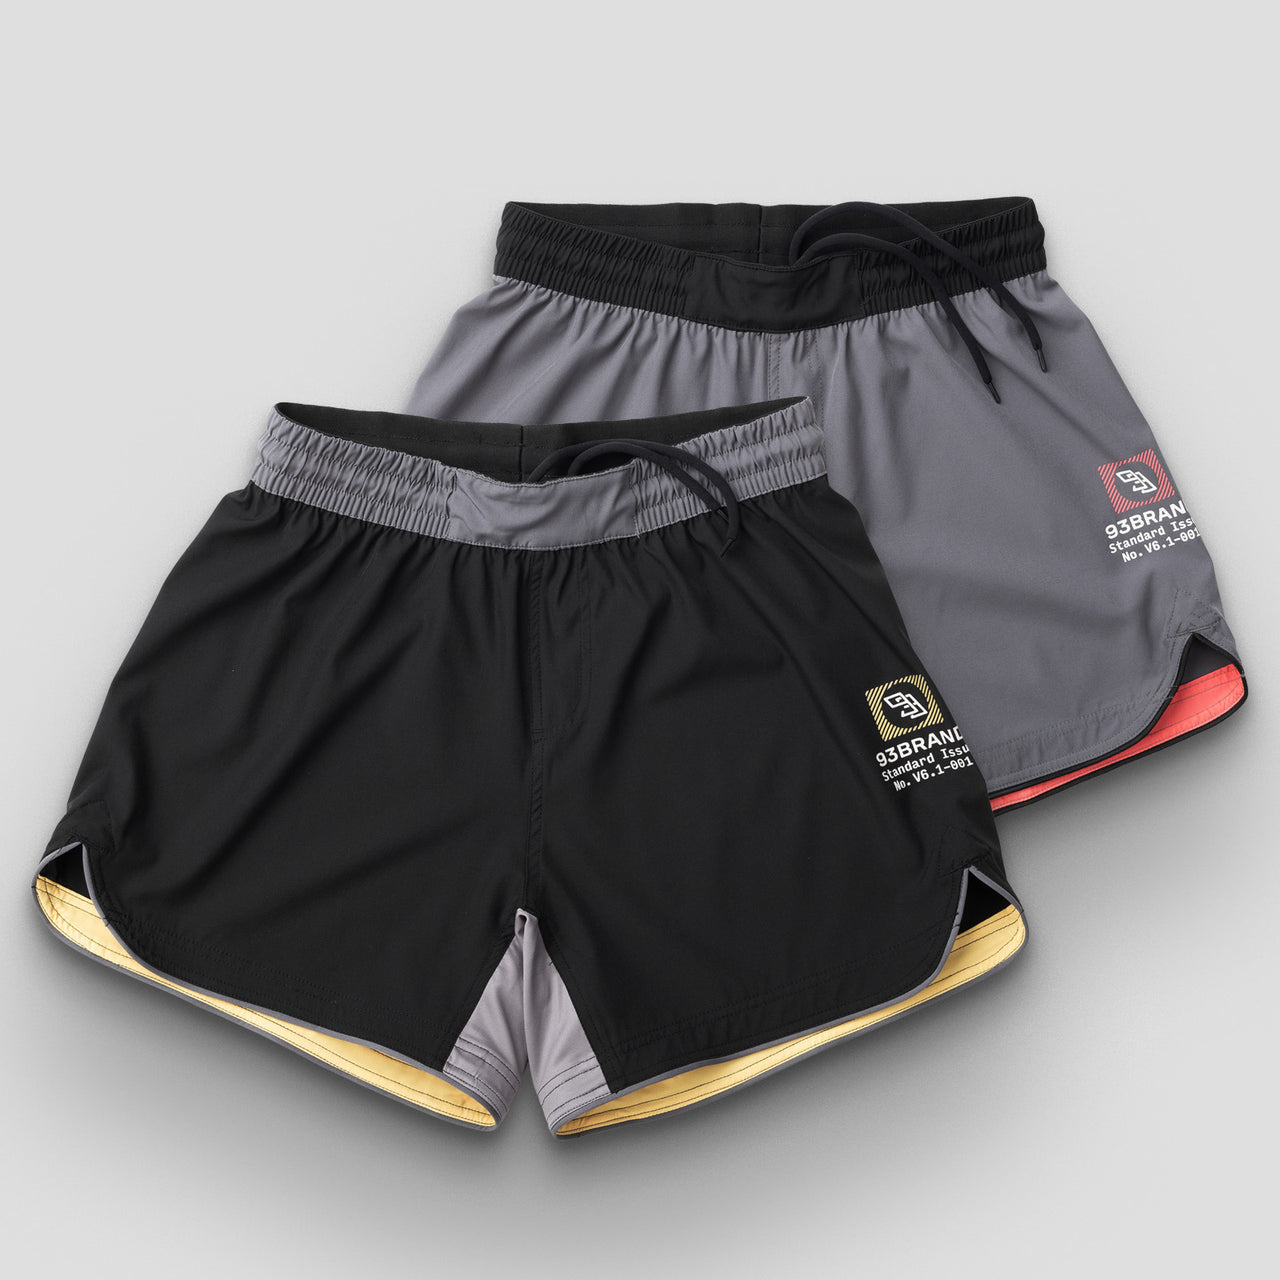 93brand Standard Issue Grappling Shorts 2PACK (Shorter Length) - Black/Yellow & Grey/Red